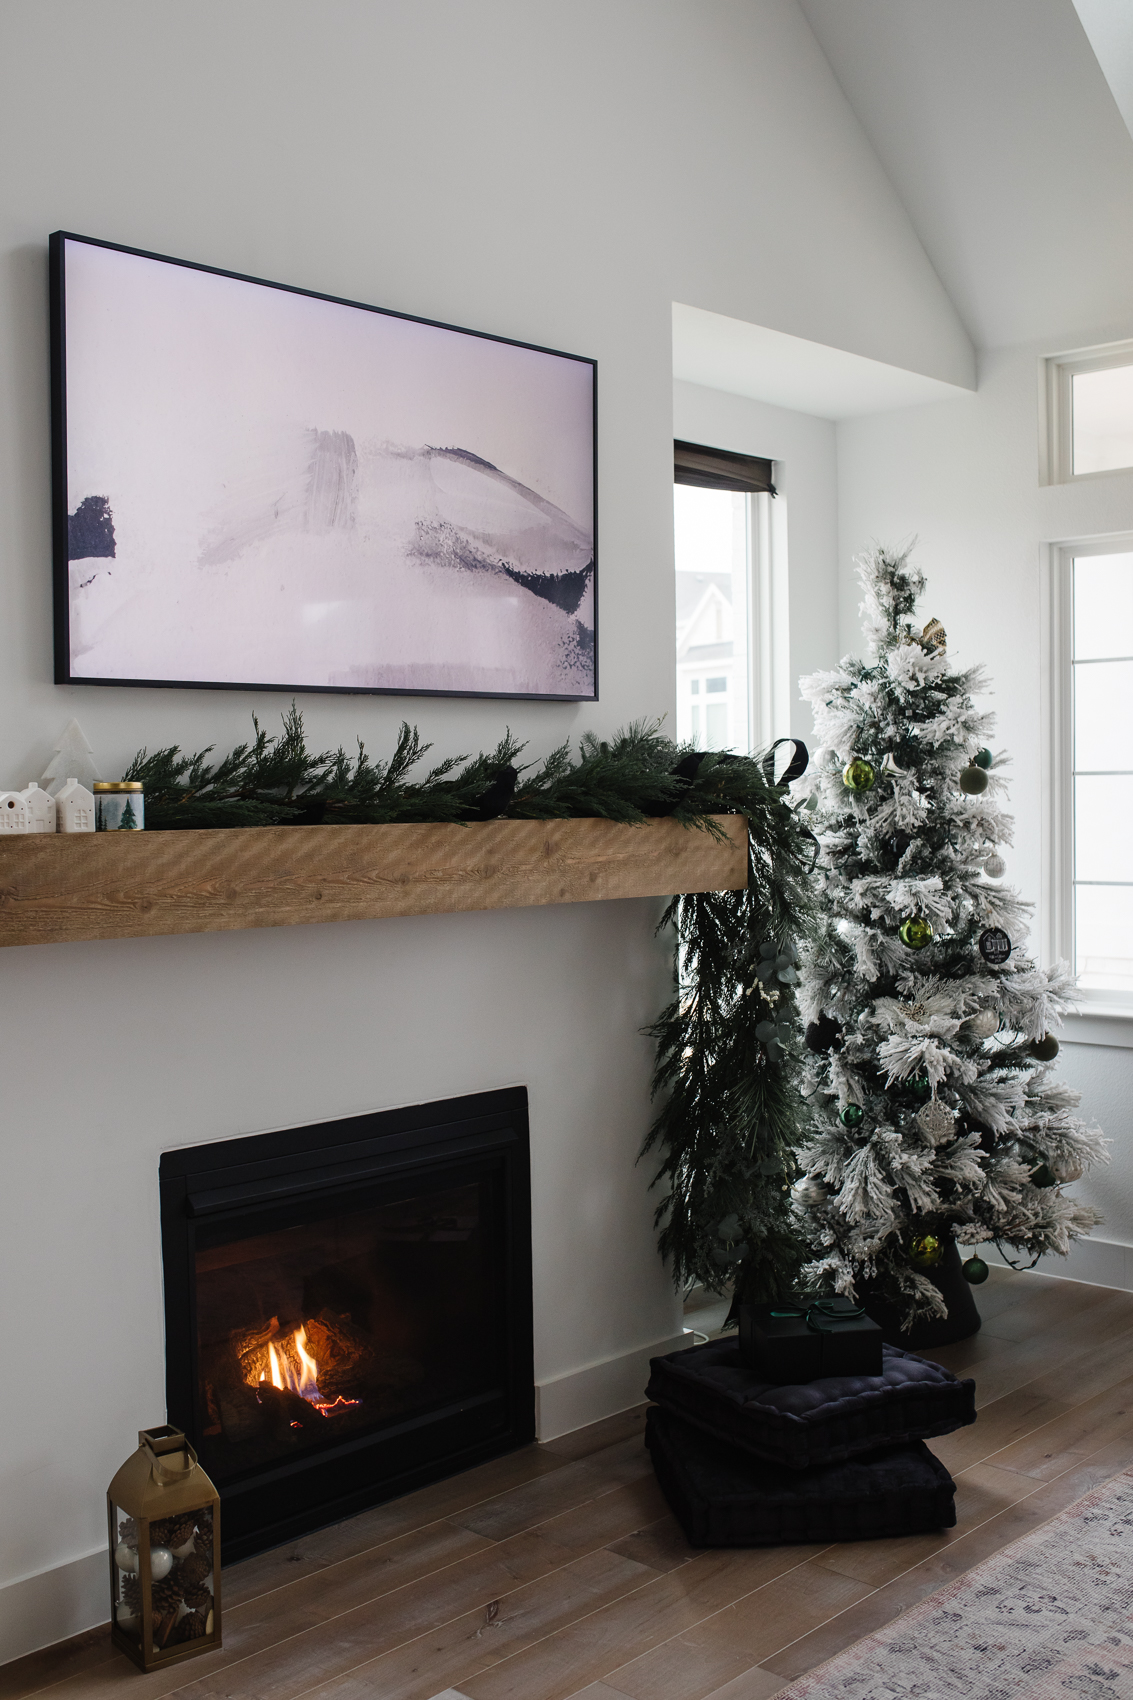 Christmas decor ideas from blogger Hoang-Kim Cung including an asymmetrical cypress garland and a Balsam Hill flocked tree